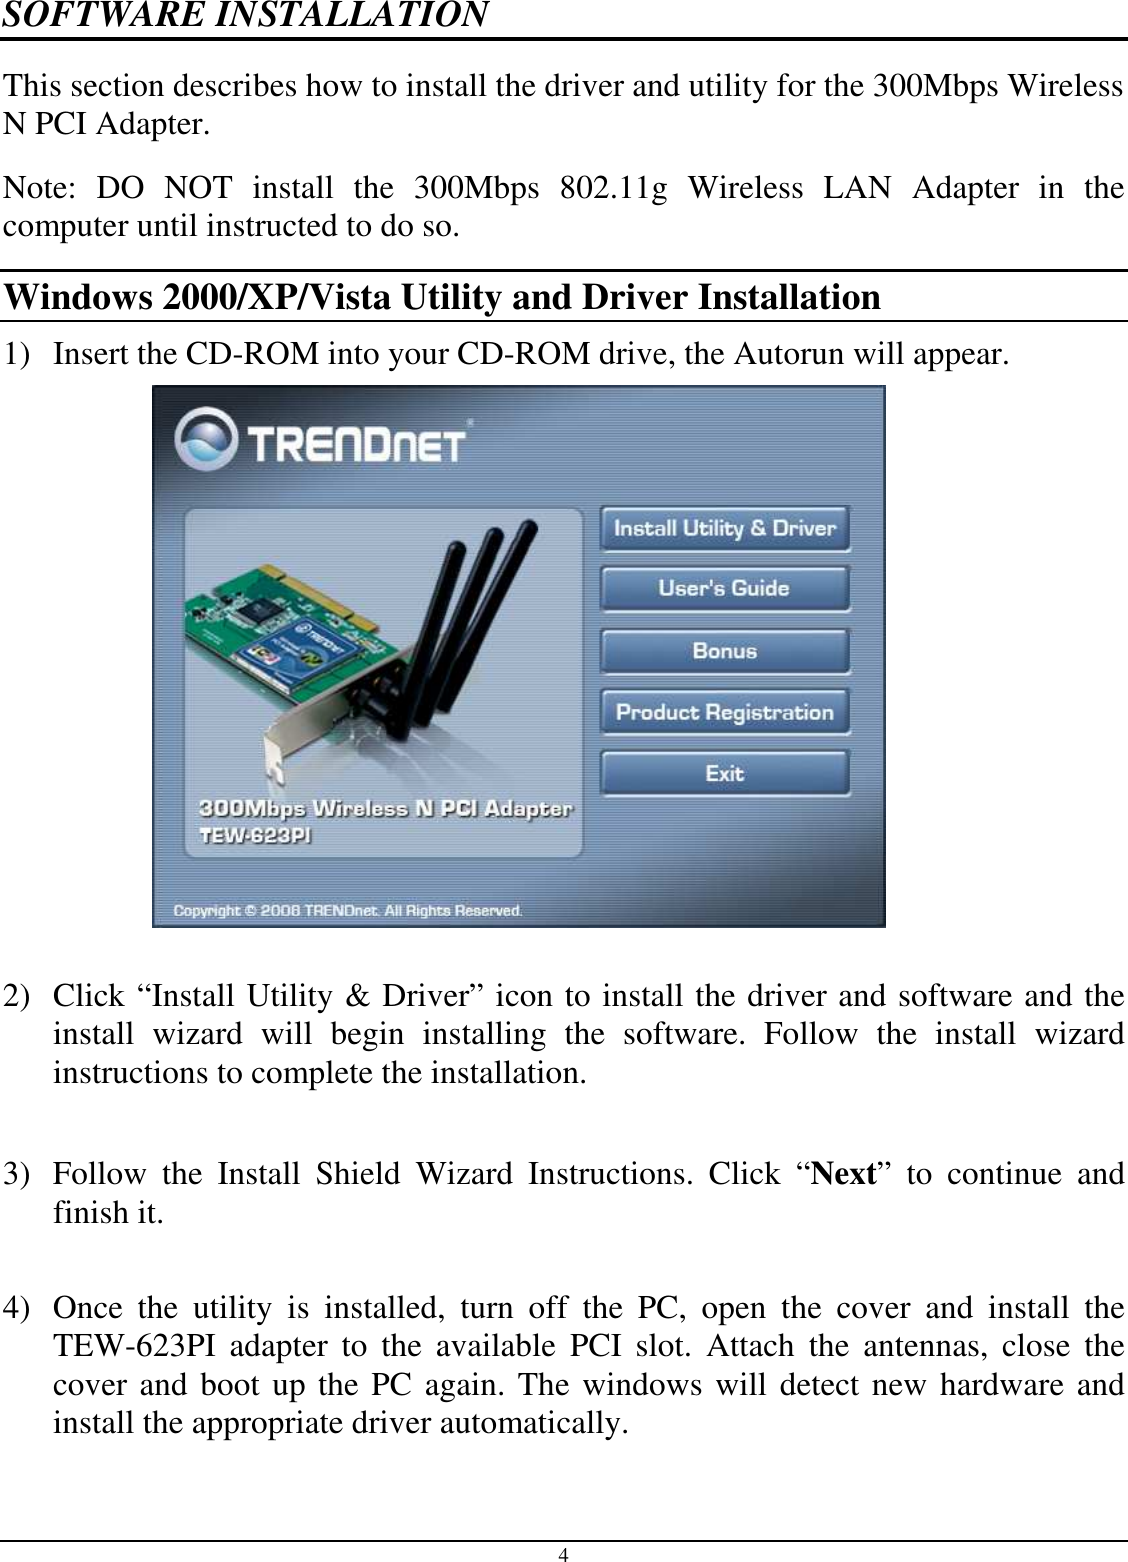 4 SOFTWARE INSTALLATION This section describes how to install the driver and utility for the 300Mbps Wireless N PCI Adapter. Note:  DO  NOT  install  the  300Mbps  802.11g  Wireless  LAN  Adapter  in  the computer until instructed to do so. Windows 2000/XP/Vista Utility and Driver Installation 1) Insert the CD-ROM into your CD-ROM drive, the Autorun will appear.     2) Click “Install Utility &amp; Driver” icon to install the driver and software and the install  wizard  will  begin  installing  the  software.  Follow  the  install  wizard instructions to complete the installation.   3) Follow  the  Install  Shield  Wizard  Instructions.  Click  “Next”  to  continue  and finish it.   4) Once  the  utility  is  installed,  turn  off  the  PC,  open  the  cover  and  install  the TEW-623PI  adapter  to  the  available  PCI  slot.  Attach  the  antennas,  close  the cover and boot up the PC again. The windows will detect new hardware and install the appropriate driver automatically.  